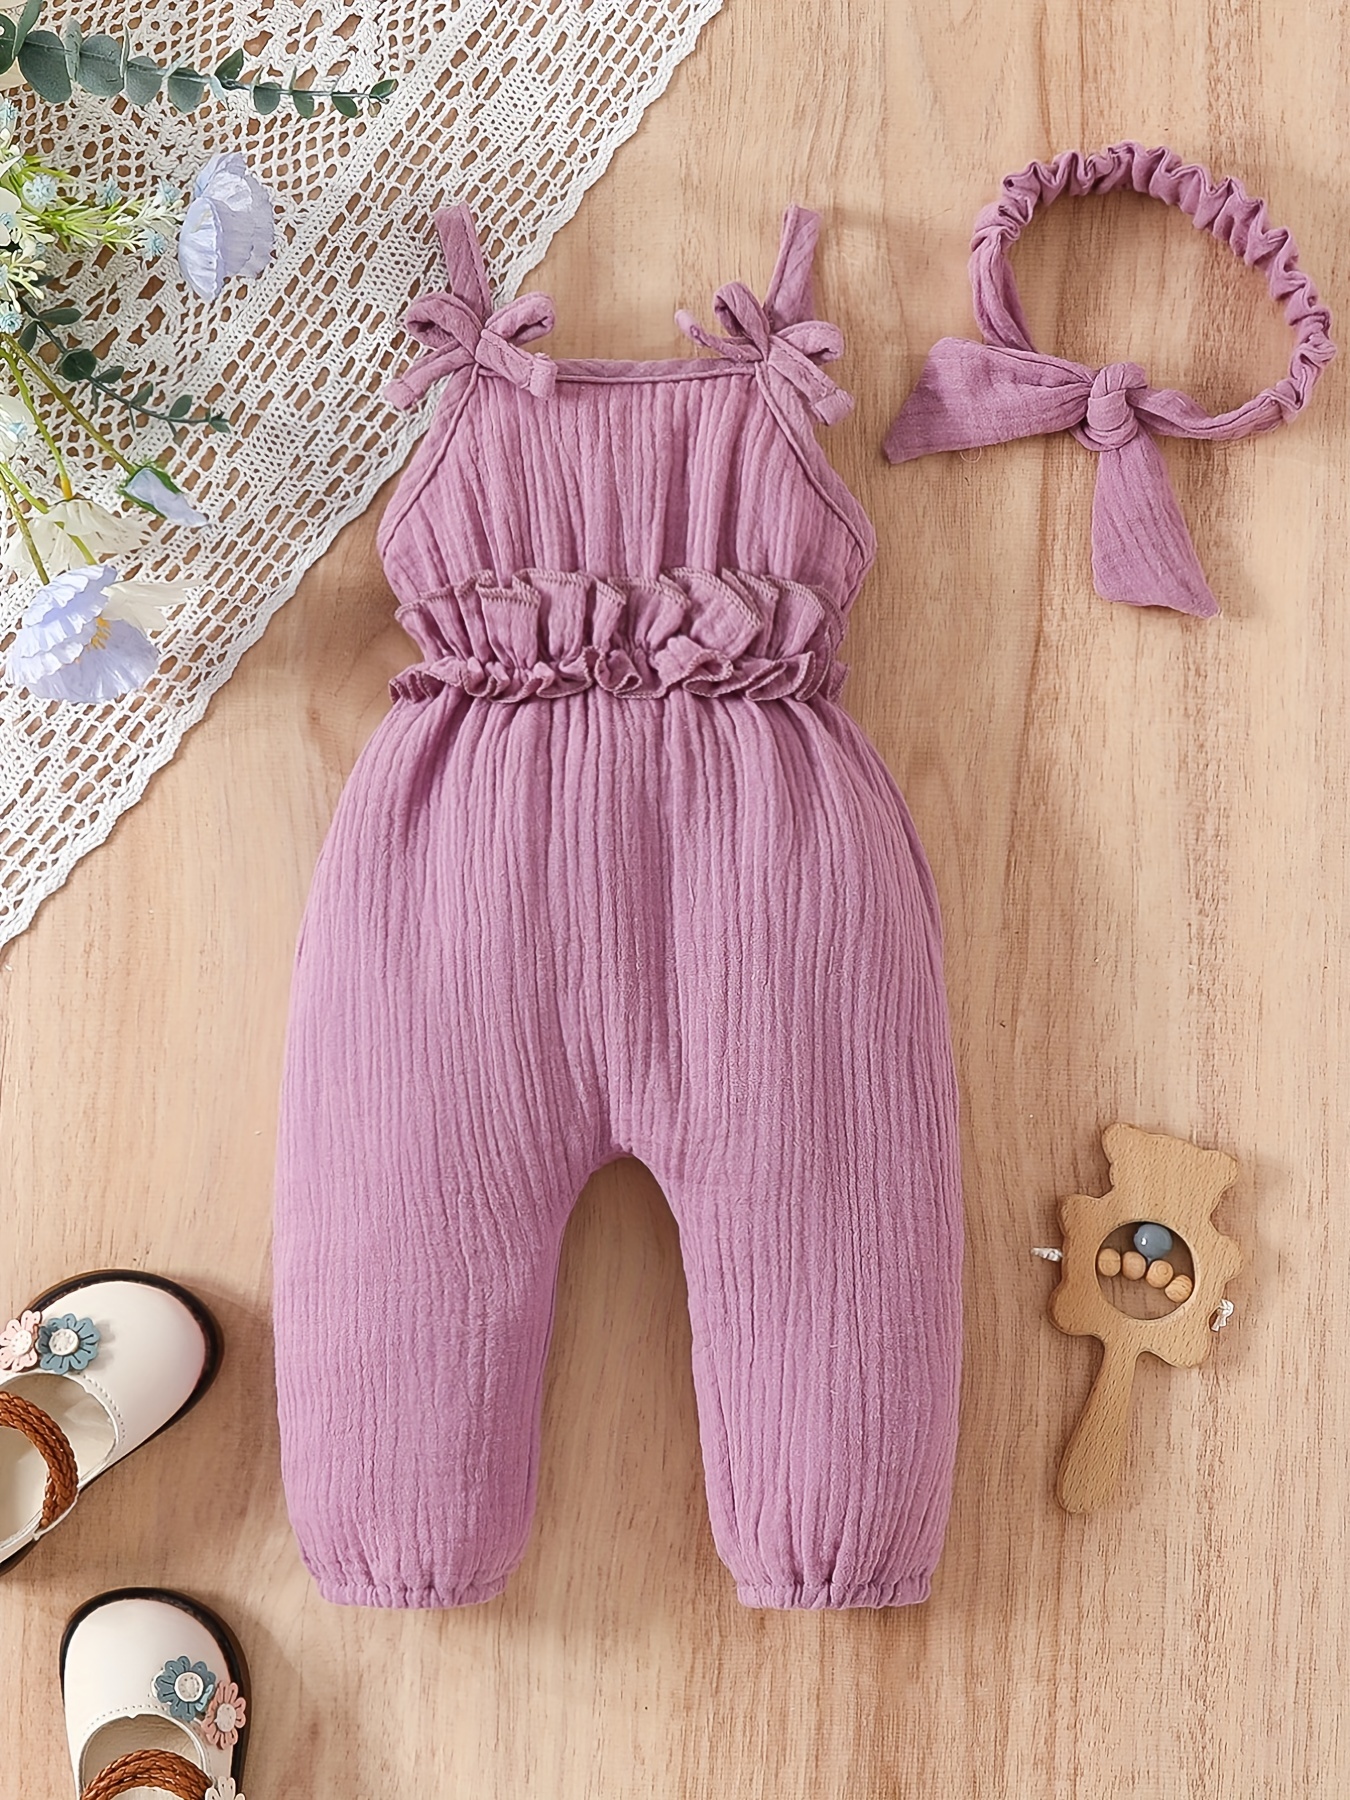 SUNSIOM Baby Girl Romper Fly Sleeve Square Neck Solid Color Chest Pocket  Buttons Summer Short Romper + Headband 2pcs - AliExpress